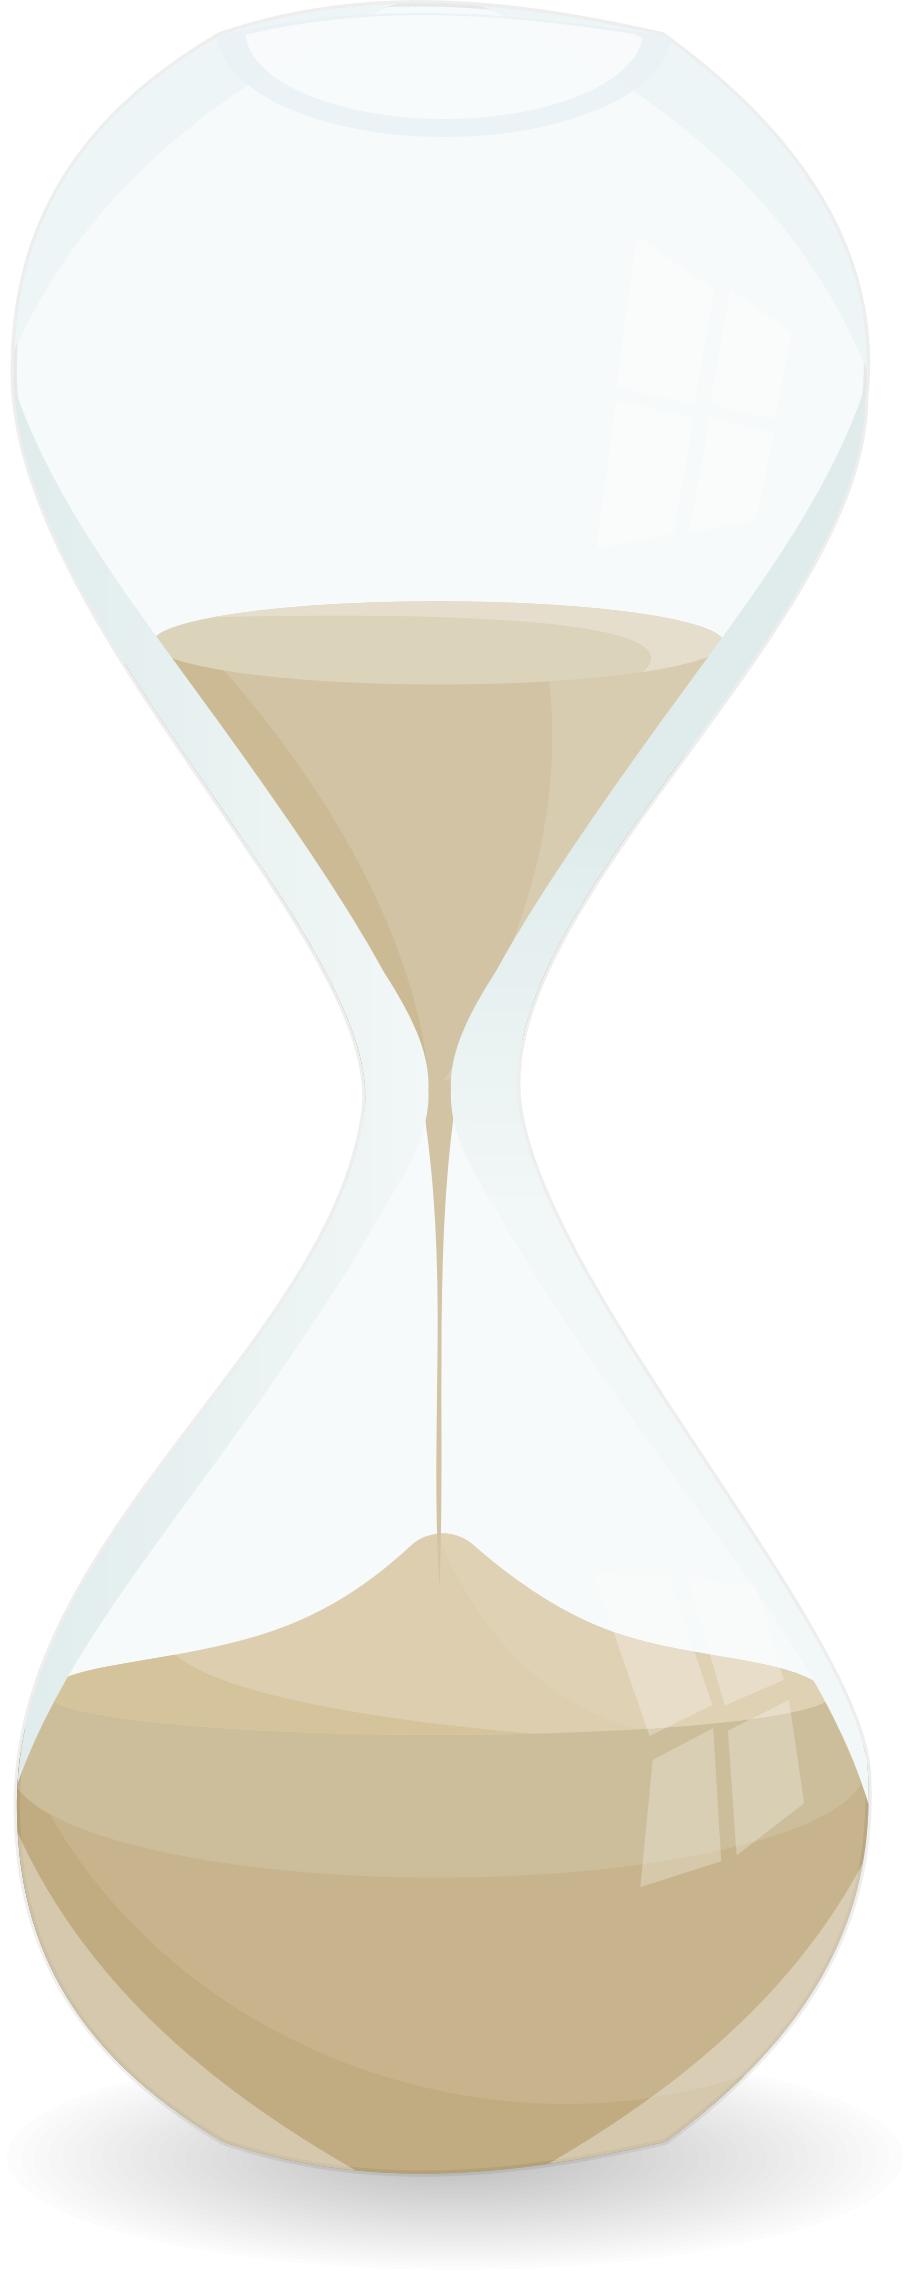 Sand Clock png